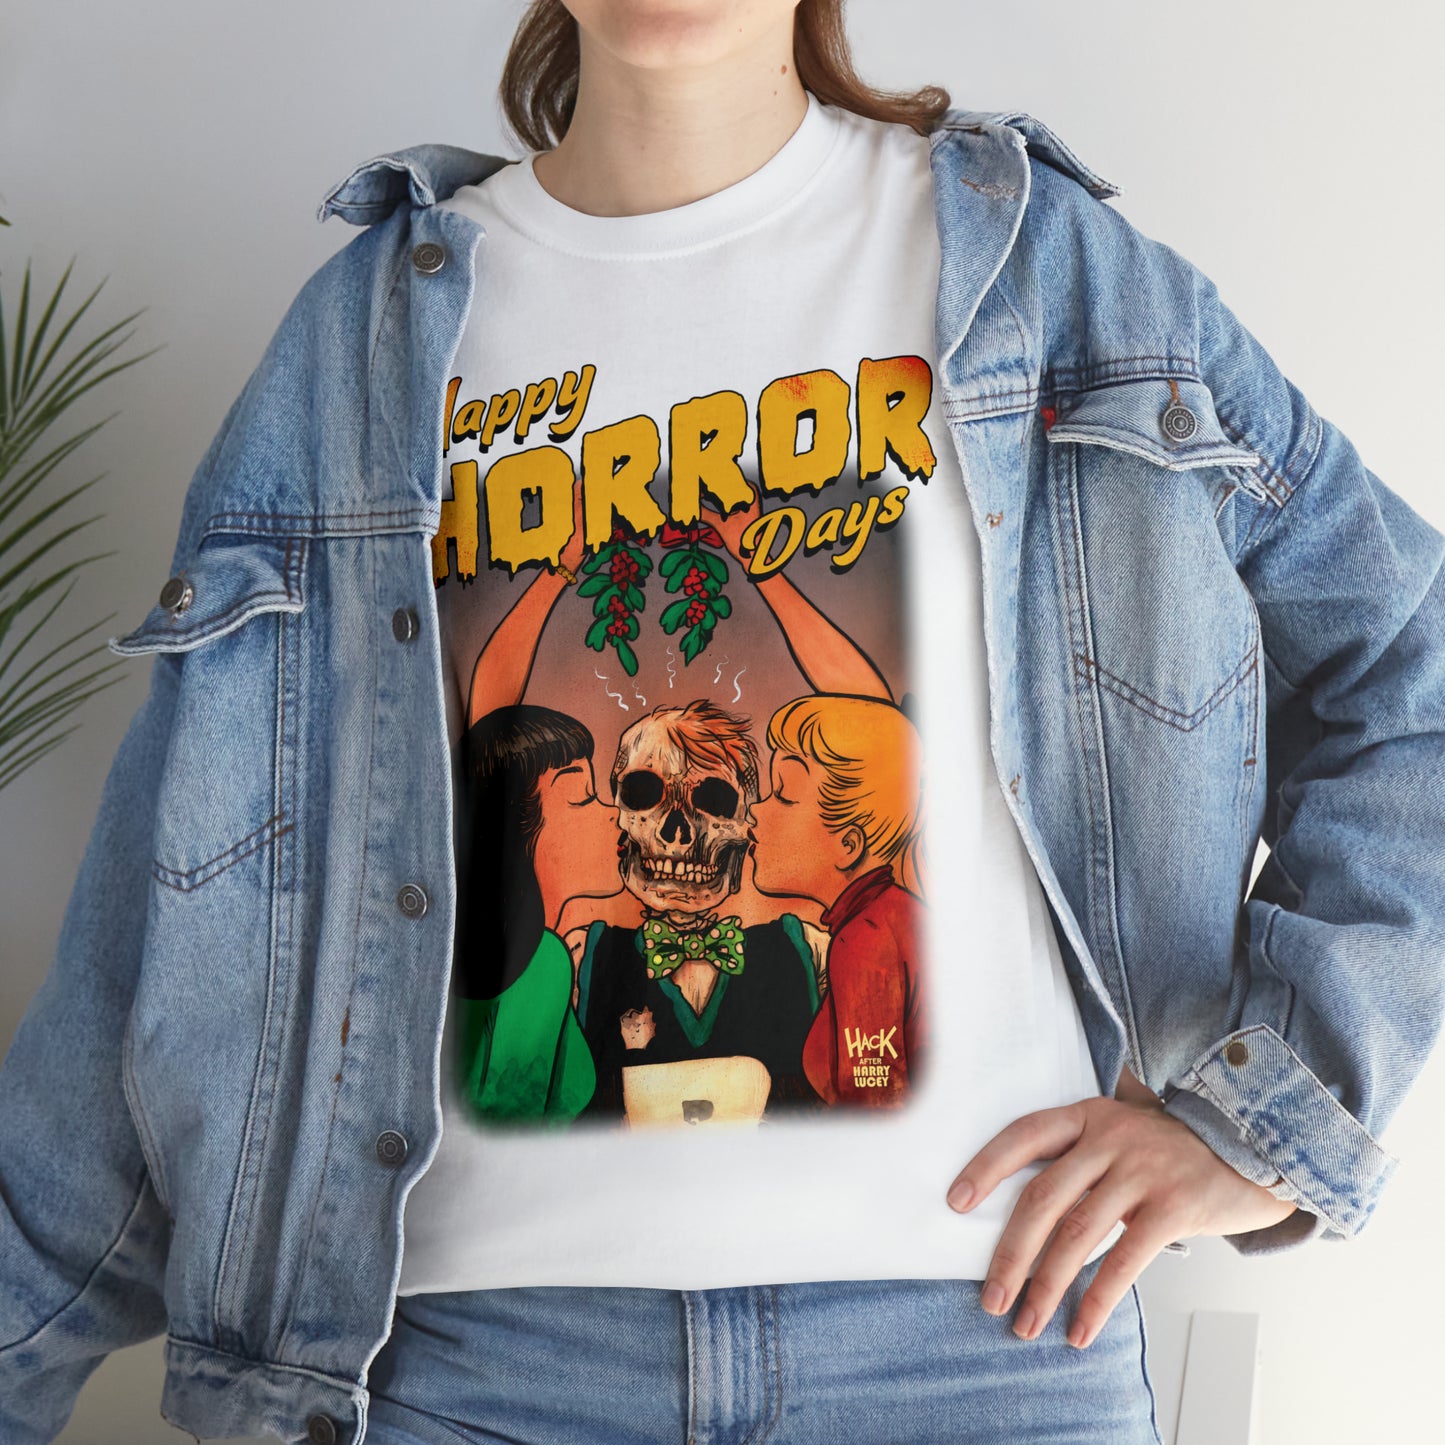 Happy Horror Days Love Triangle Graphic Tee (Unisex Heavy Cotton Tee) featuring Archie, Betty, and Veronica